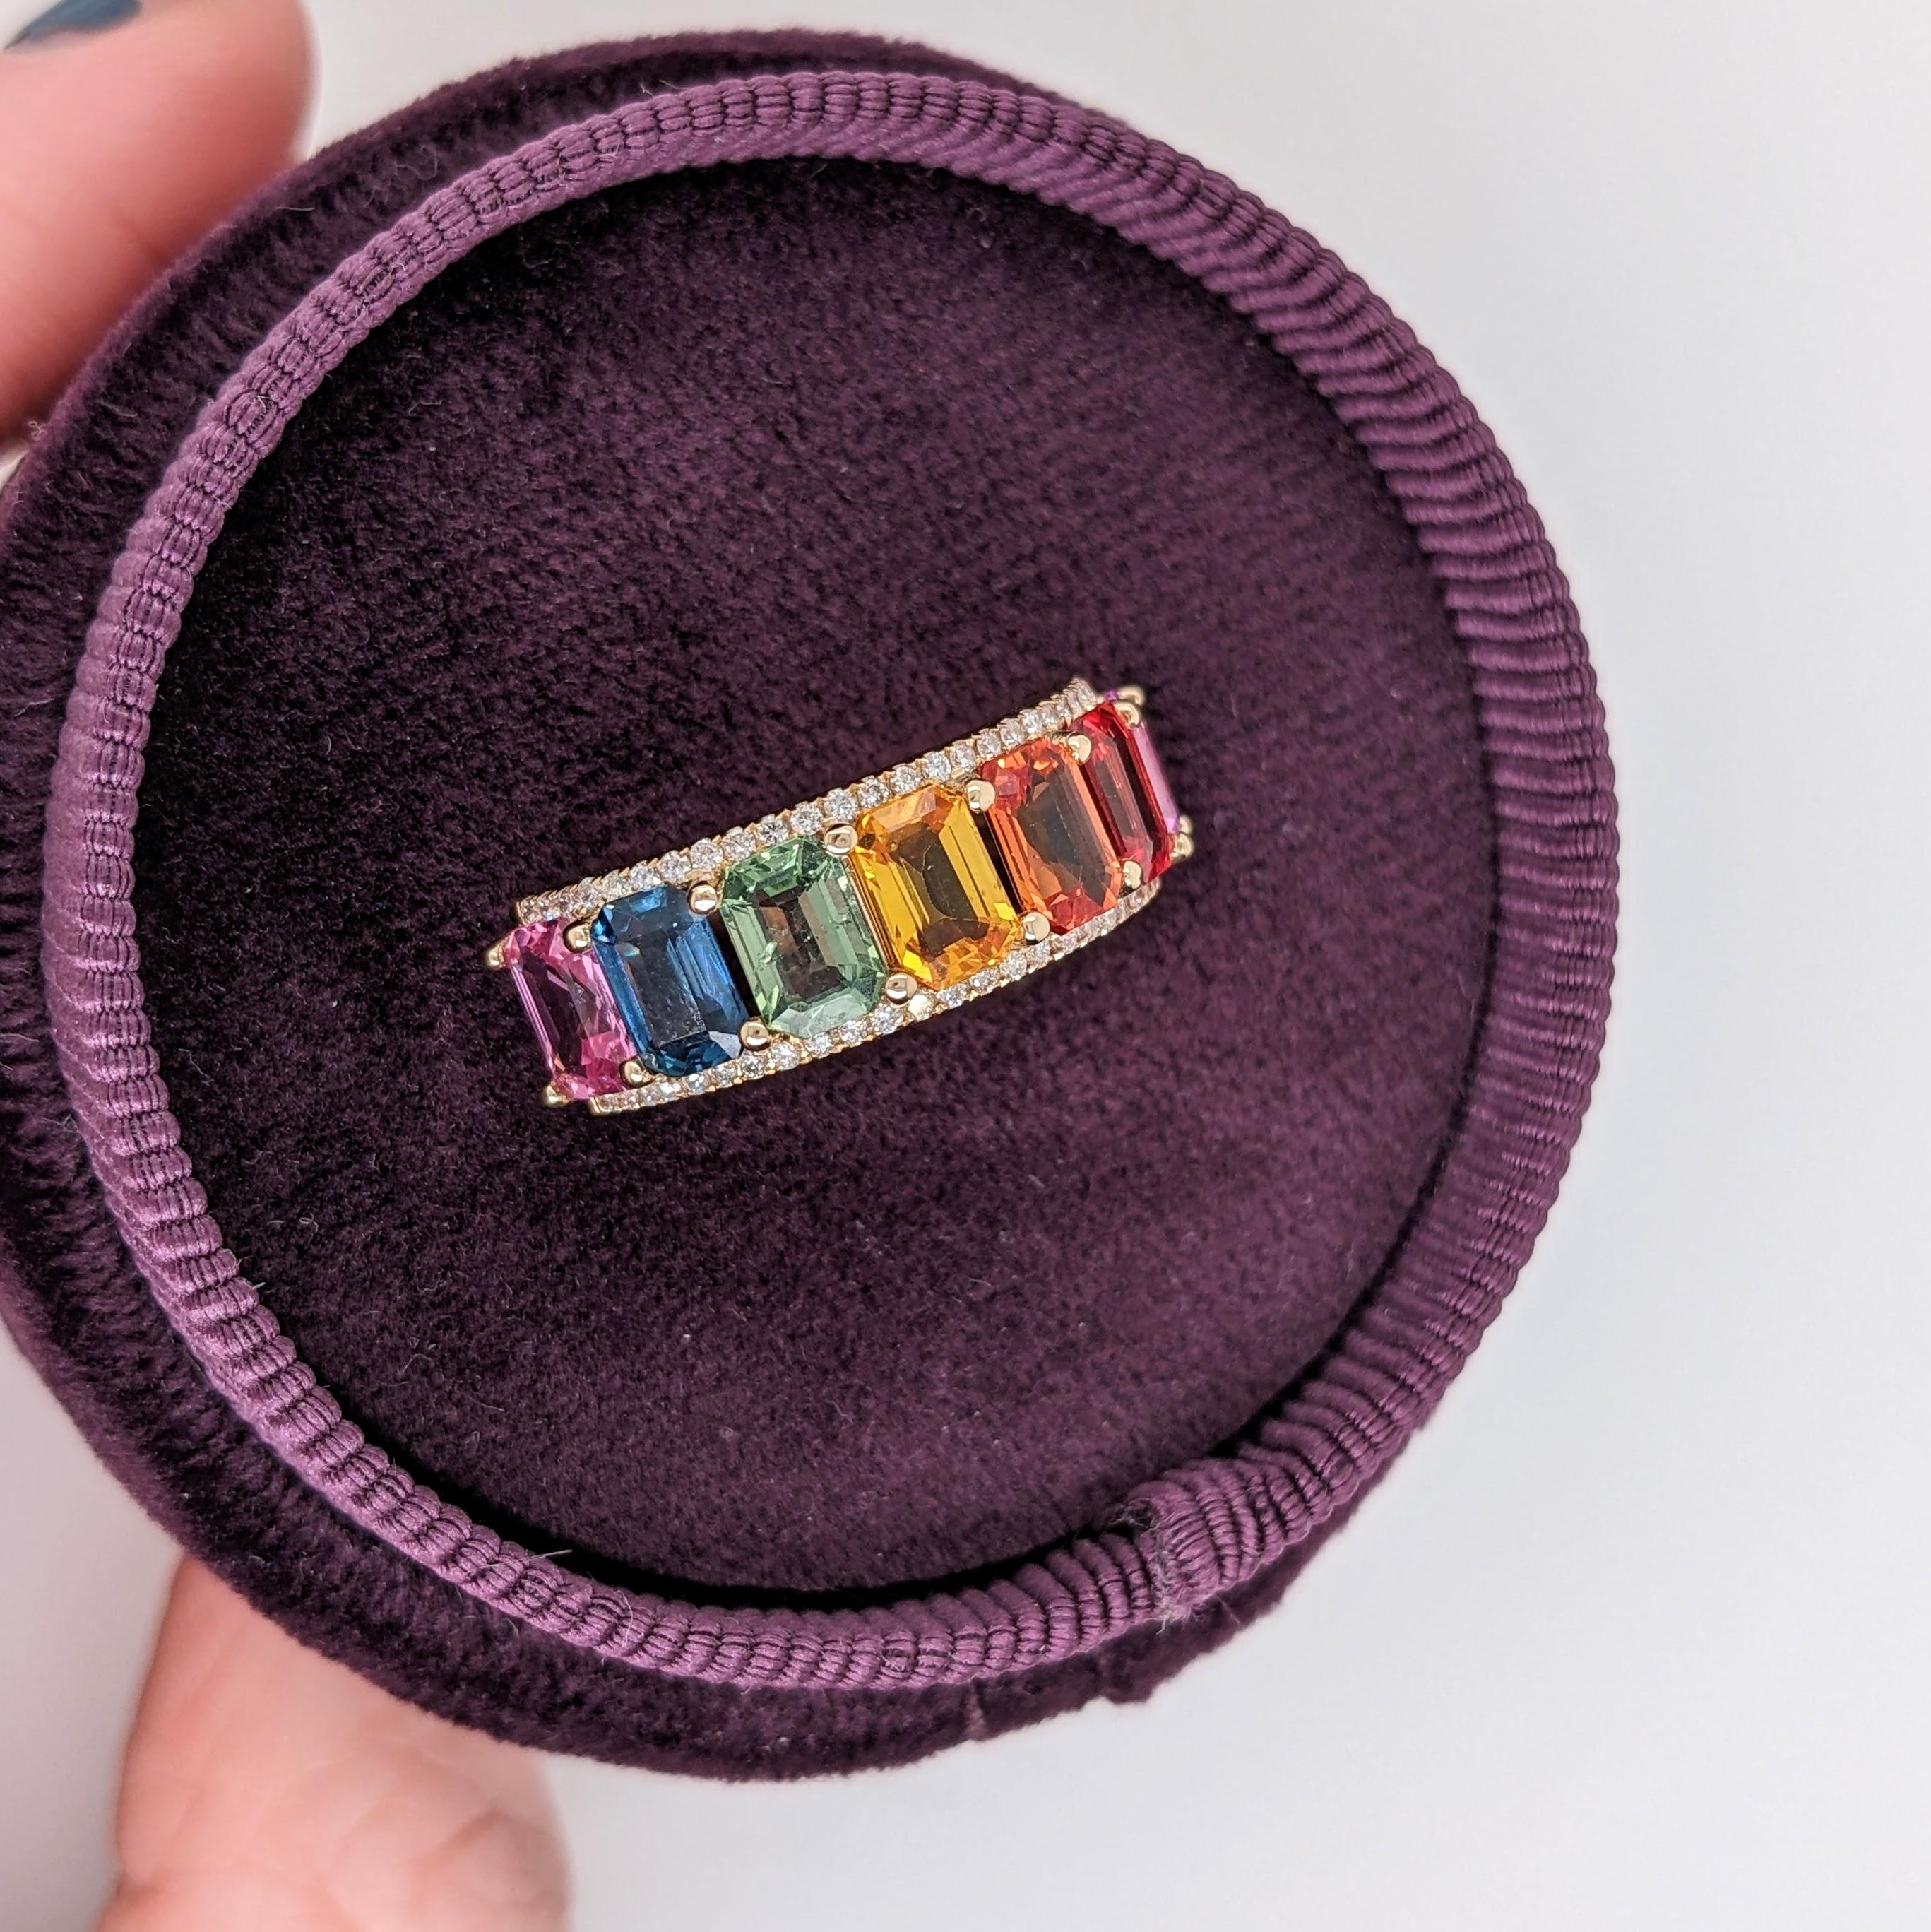 8.6ct Rainbow Sapphire w Diamond Accents in Solid 14k Gold Emerald Cut 5x4mm For Sale 2